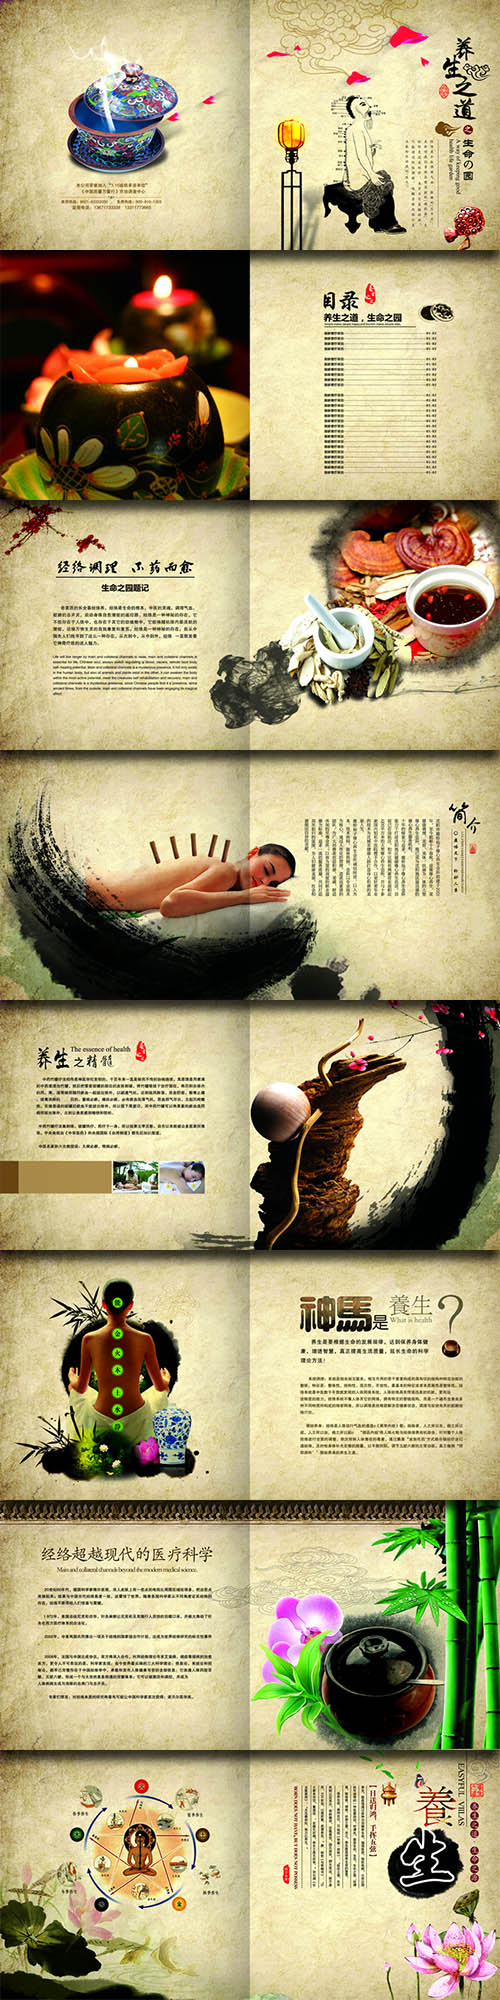 PSD Sources - Chinese Traditional Medicine #2